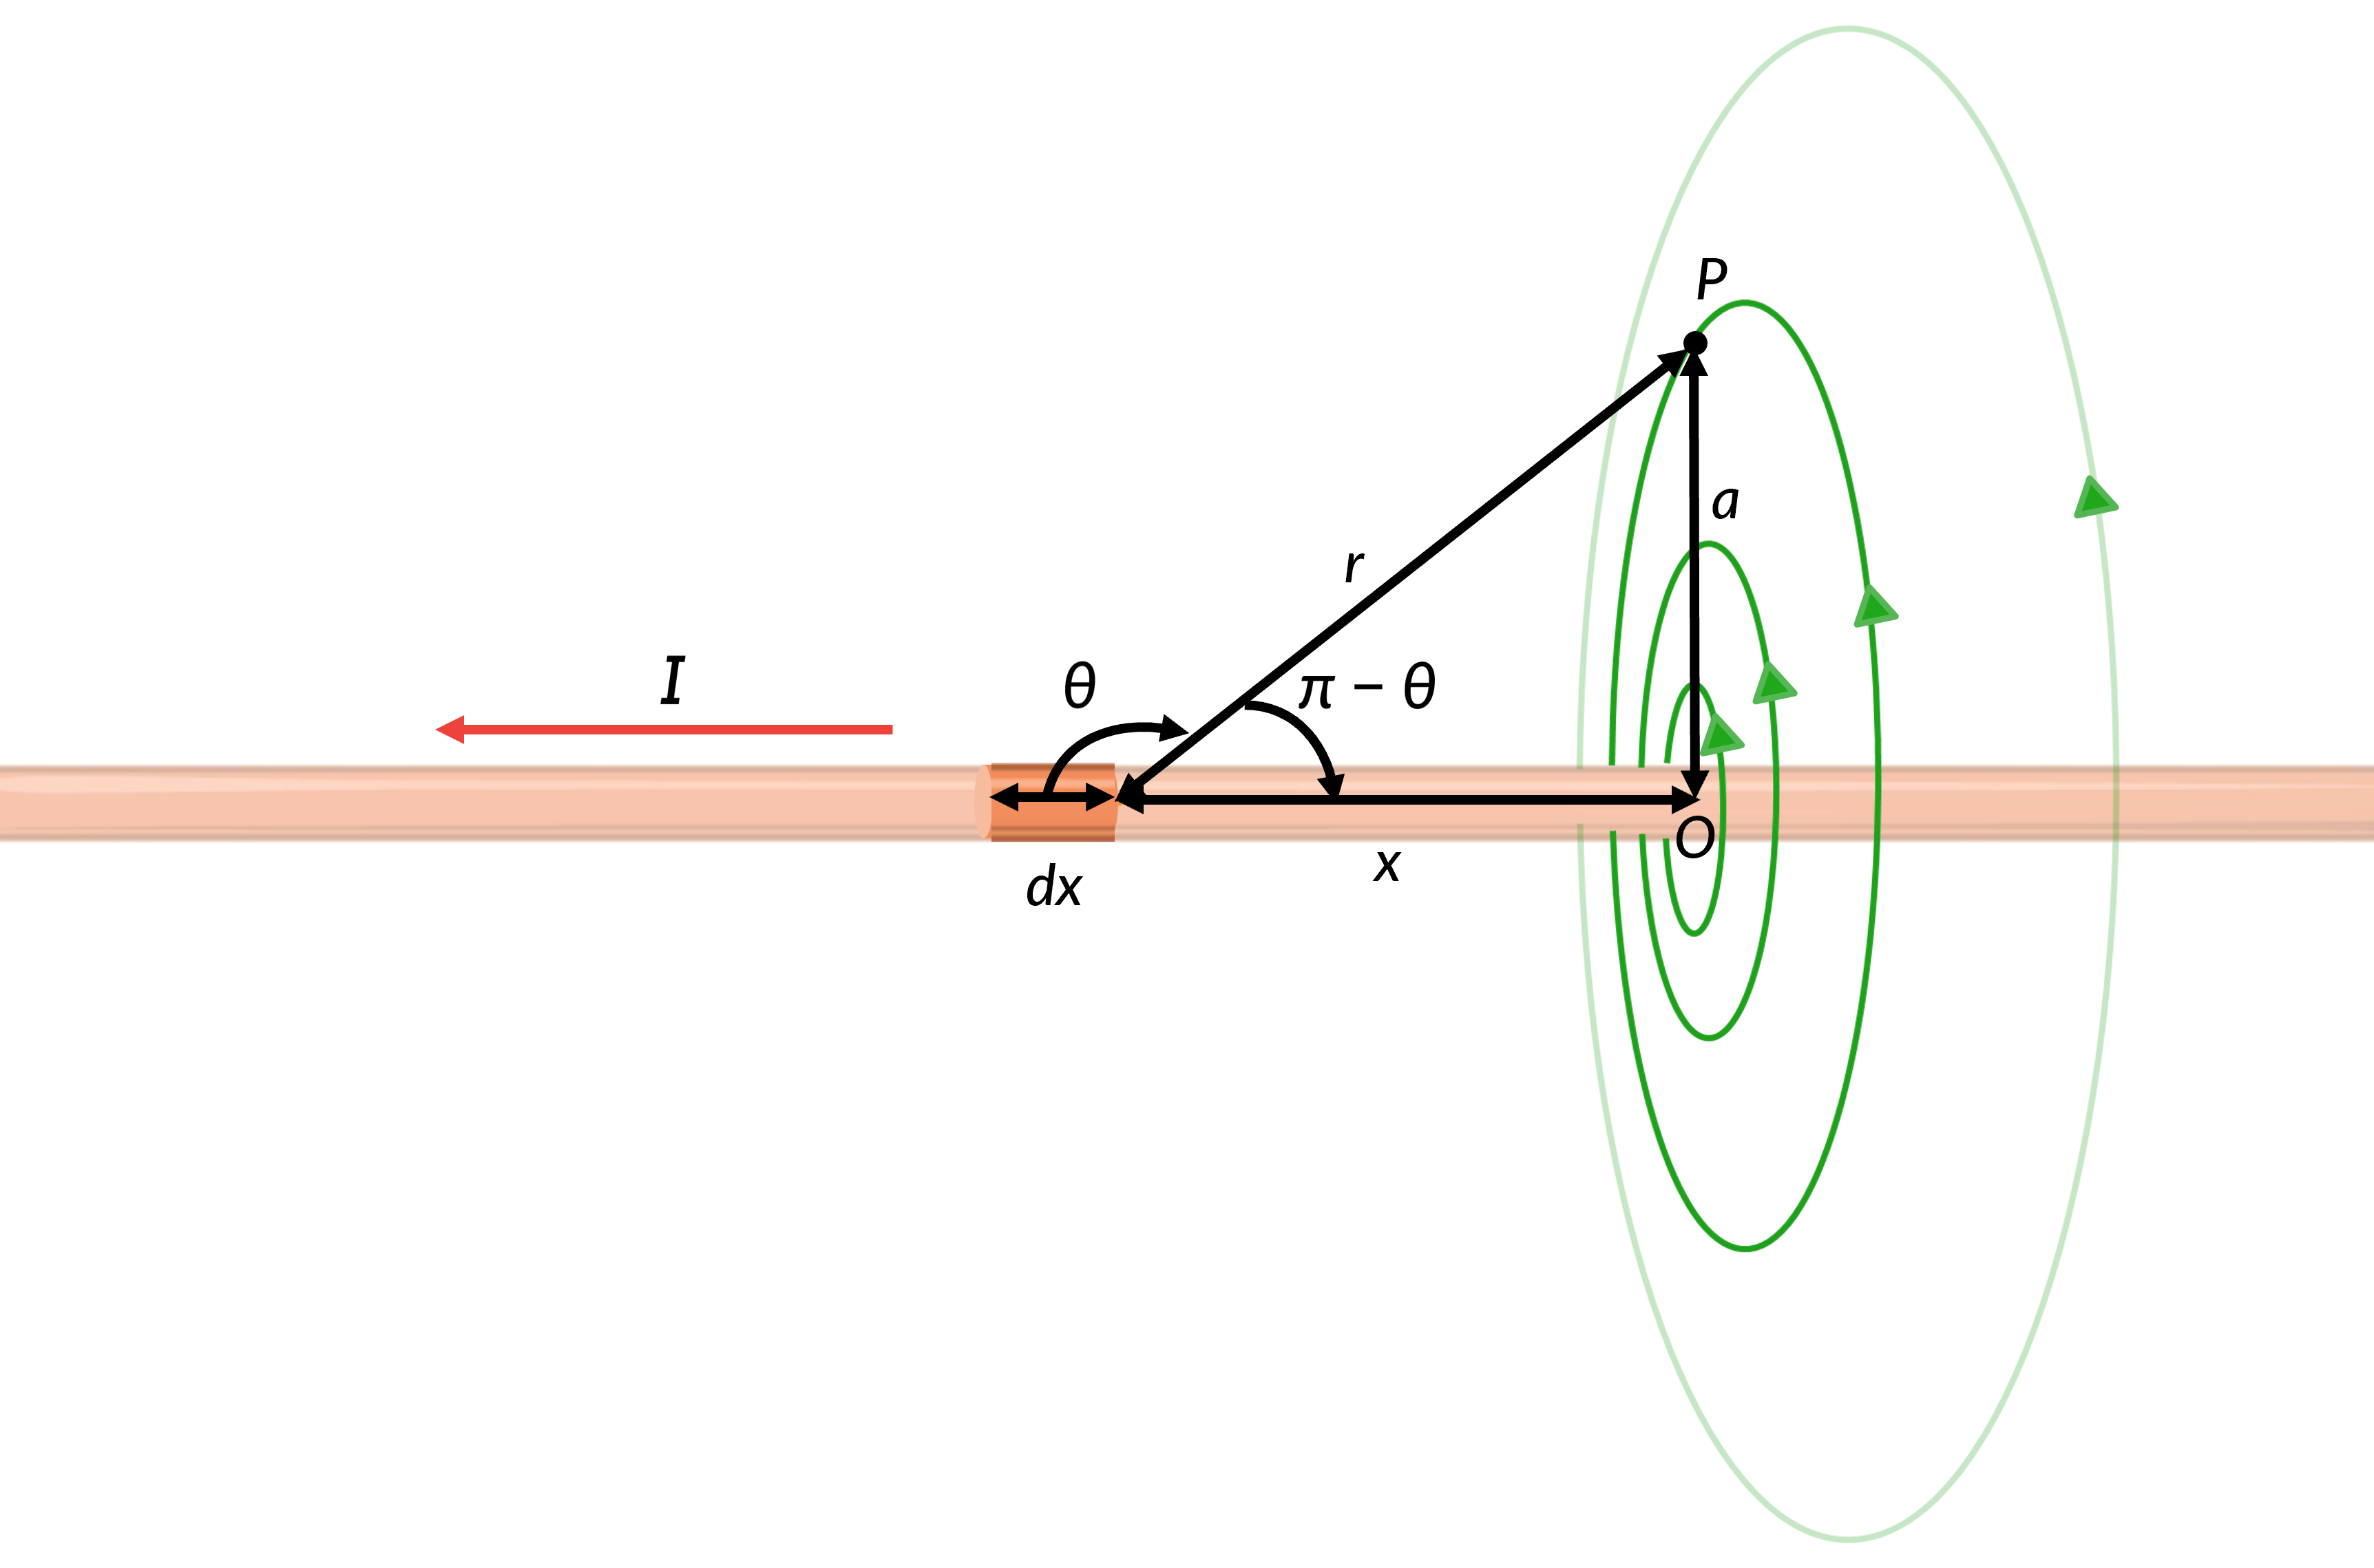 20.1 Magnetic Fields, Field Lines, and Force